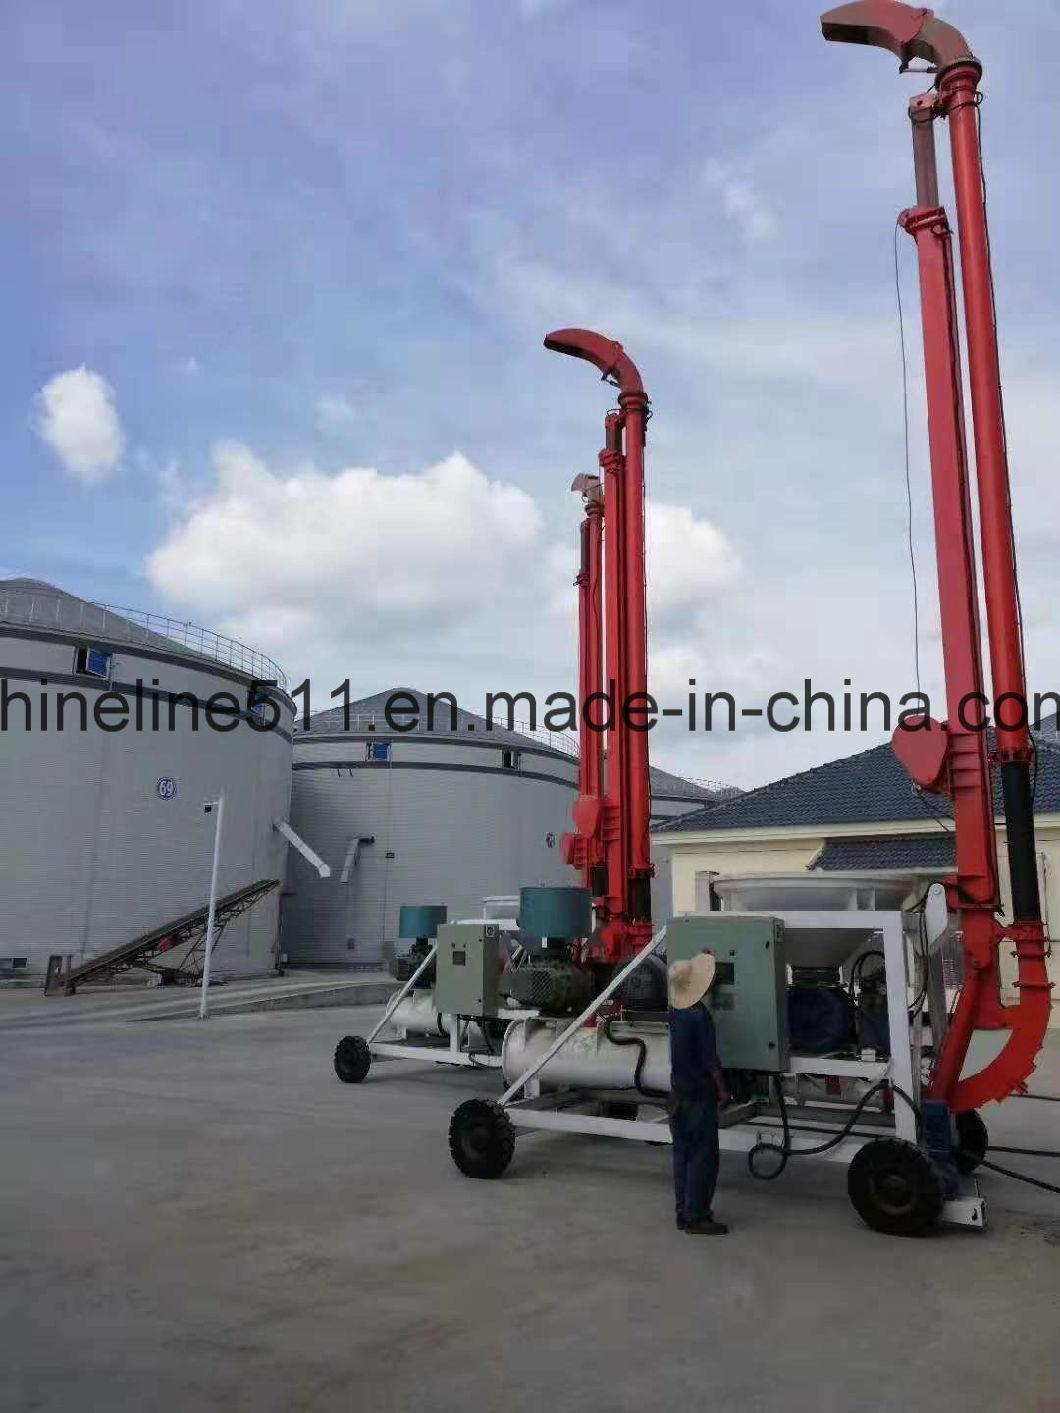 China Top Quality Series Grain Unloader, Series Ship Unloader, Grain Pump, Series Port Grain Unloader and Pneumatic Mobile Conveyors Manufacture